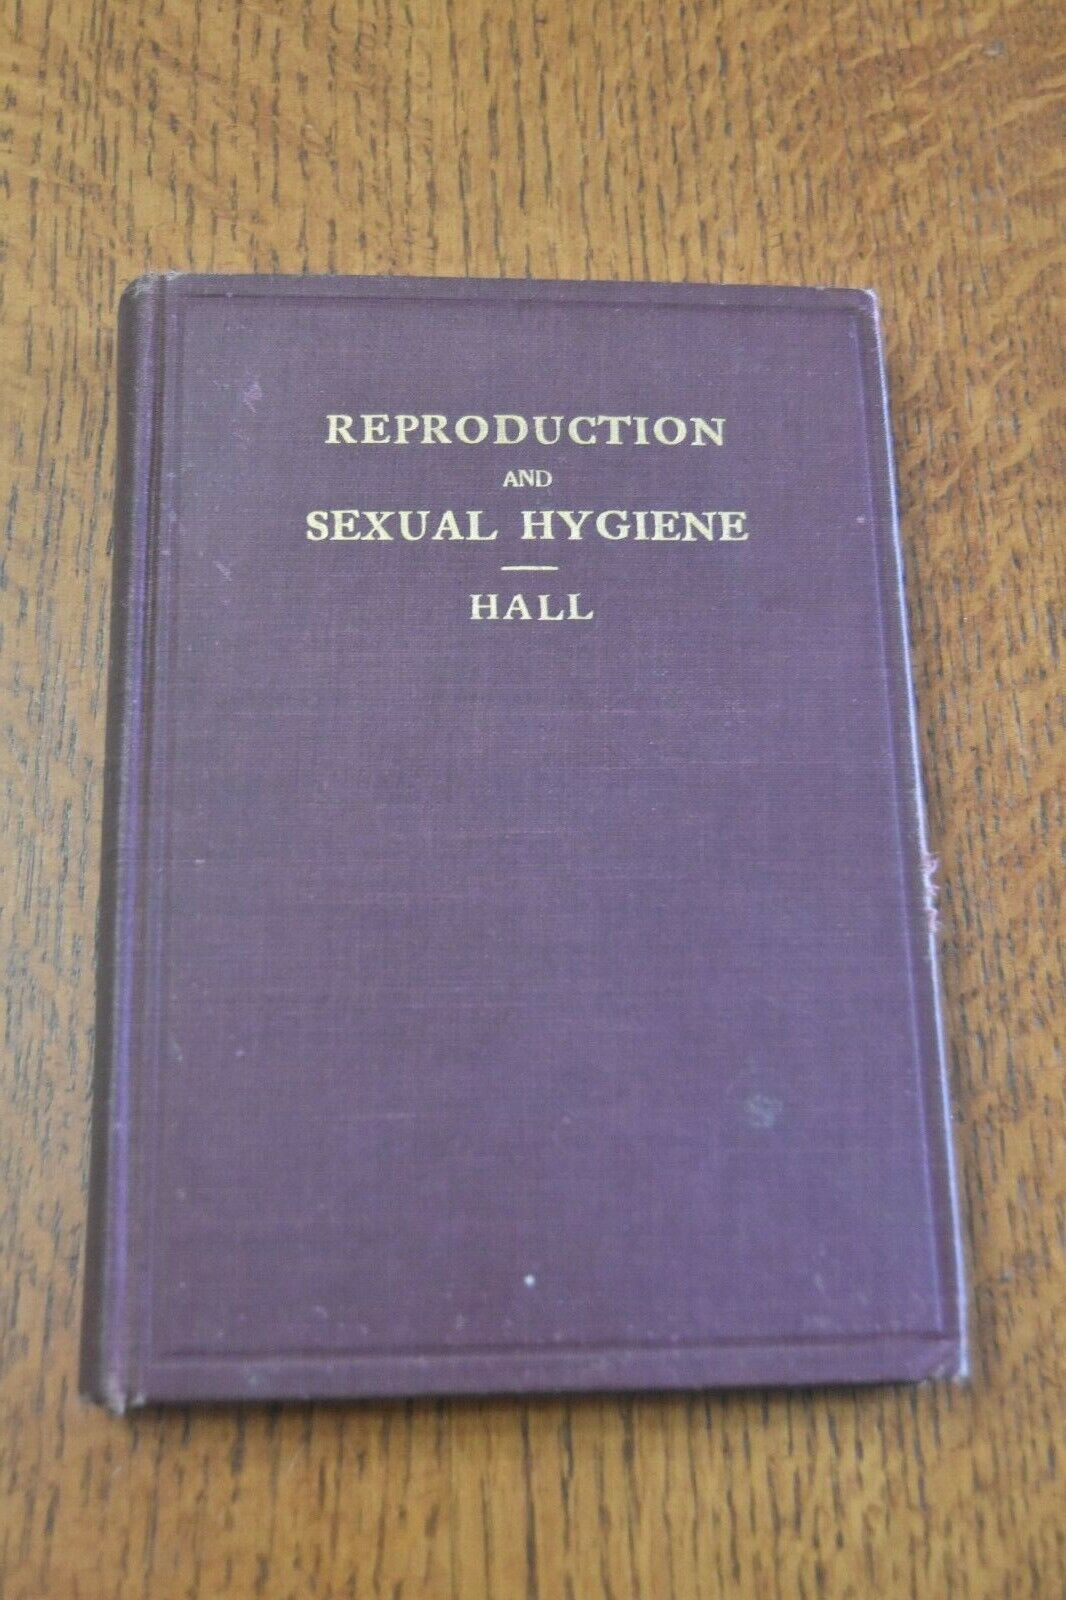 book Reproduction and Sexual Hygiene by Winfield S. Hall  1909